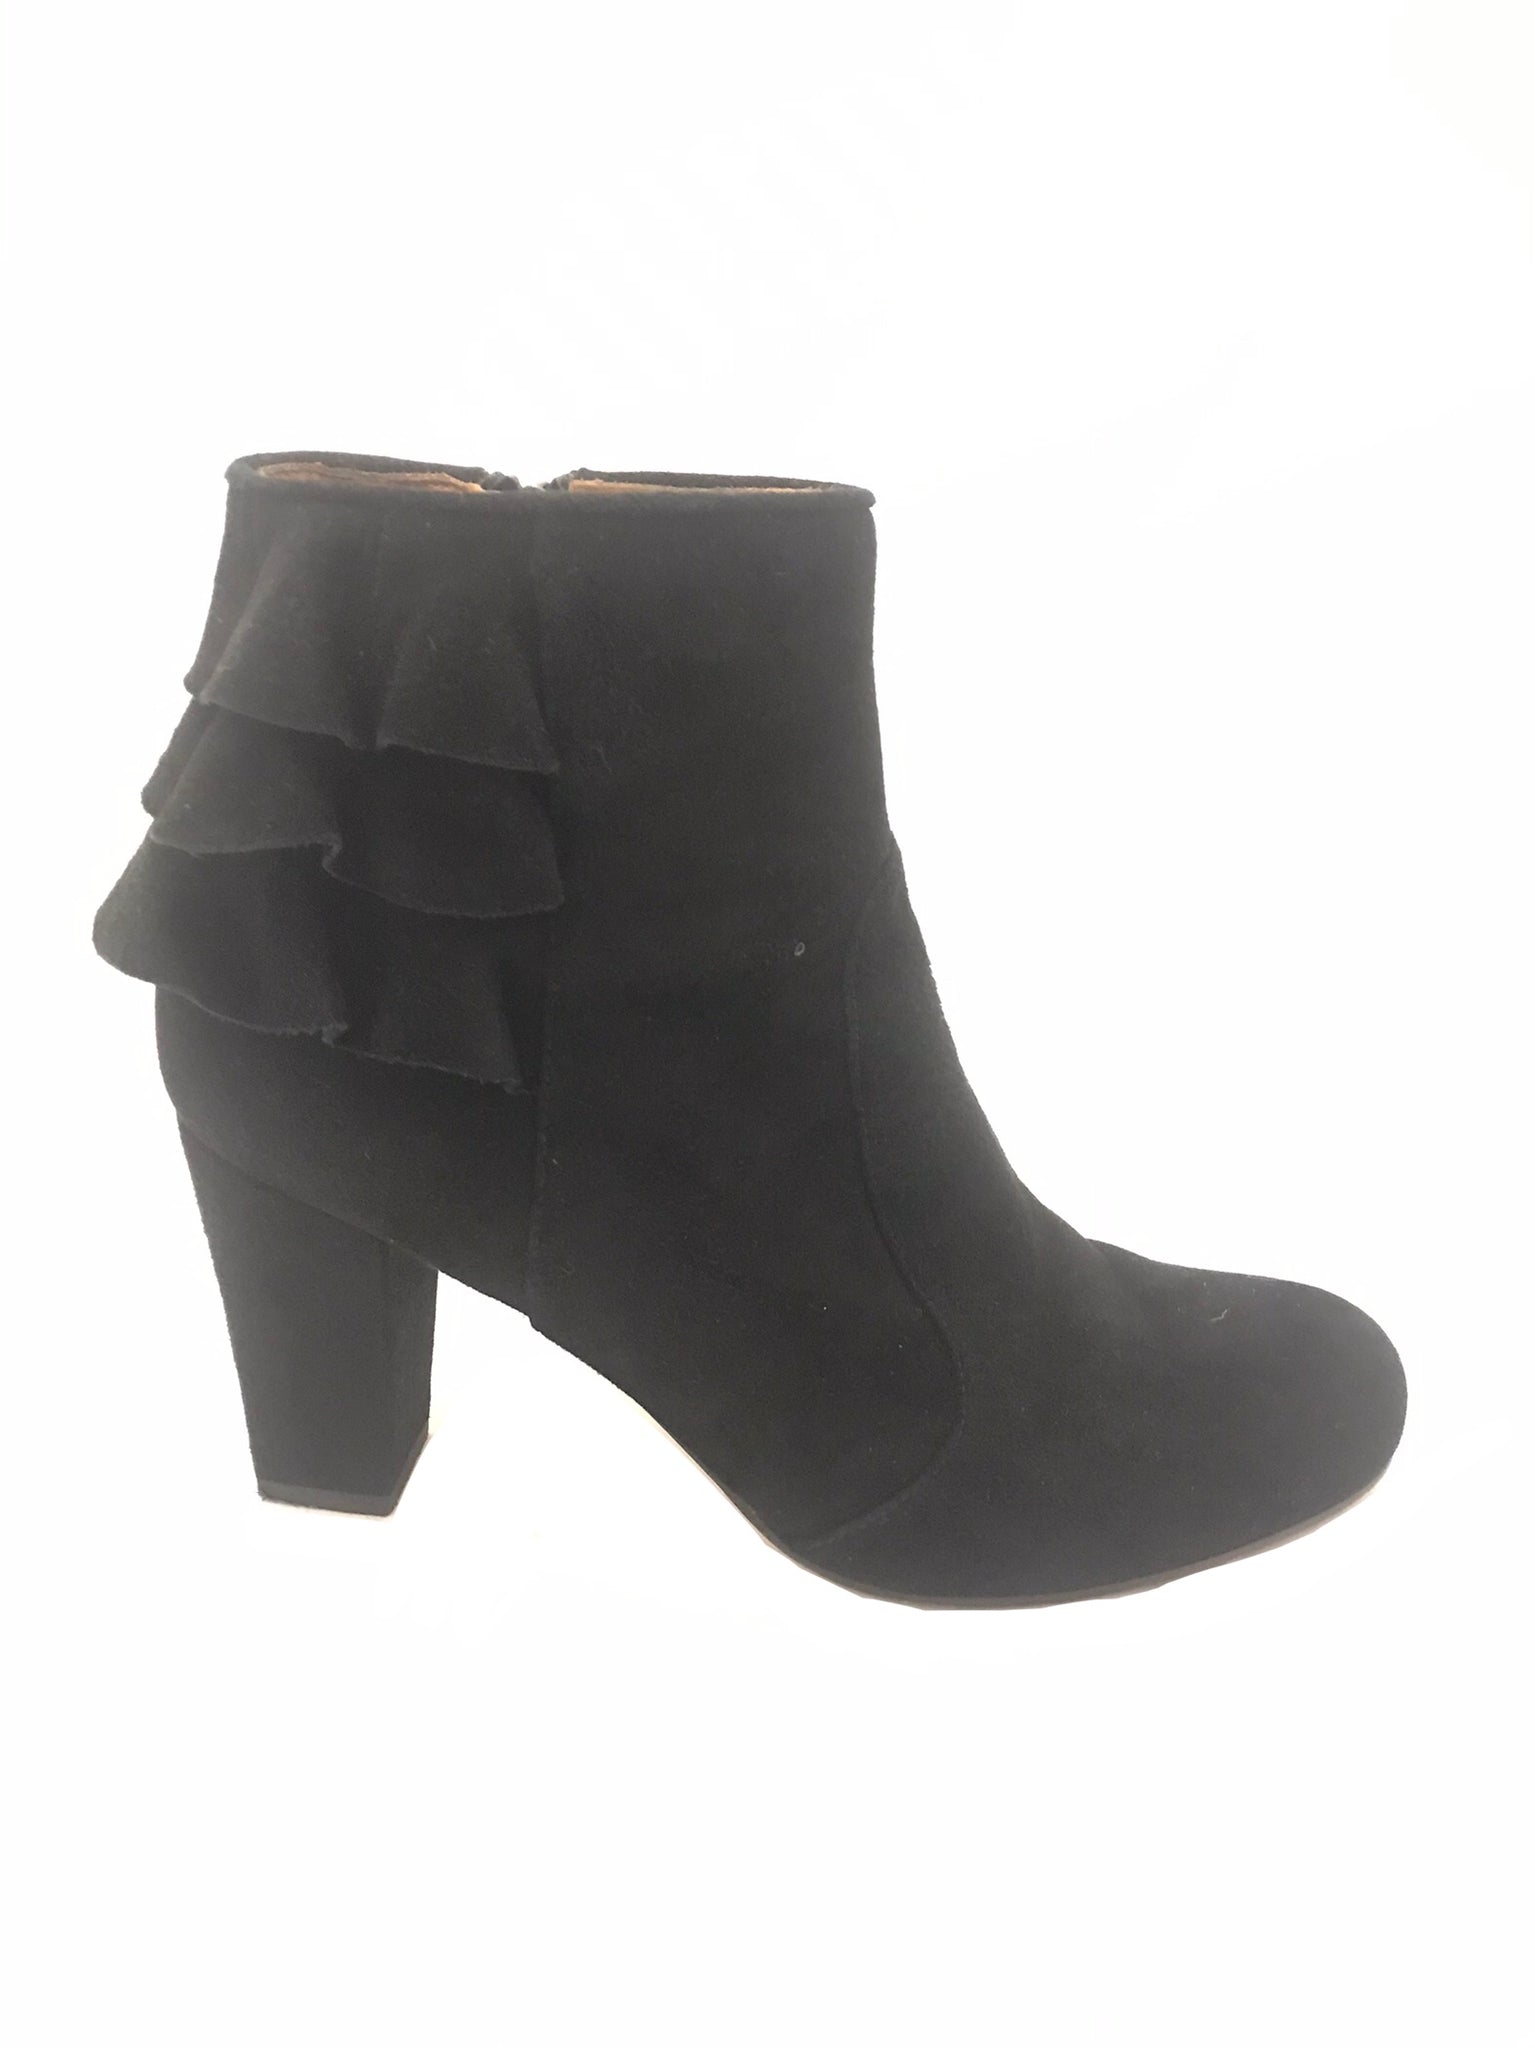 Isabella's Wardrobe Chie Mihara Frilled Suede Ankle Boots.